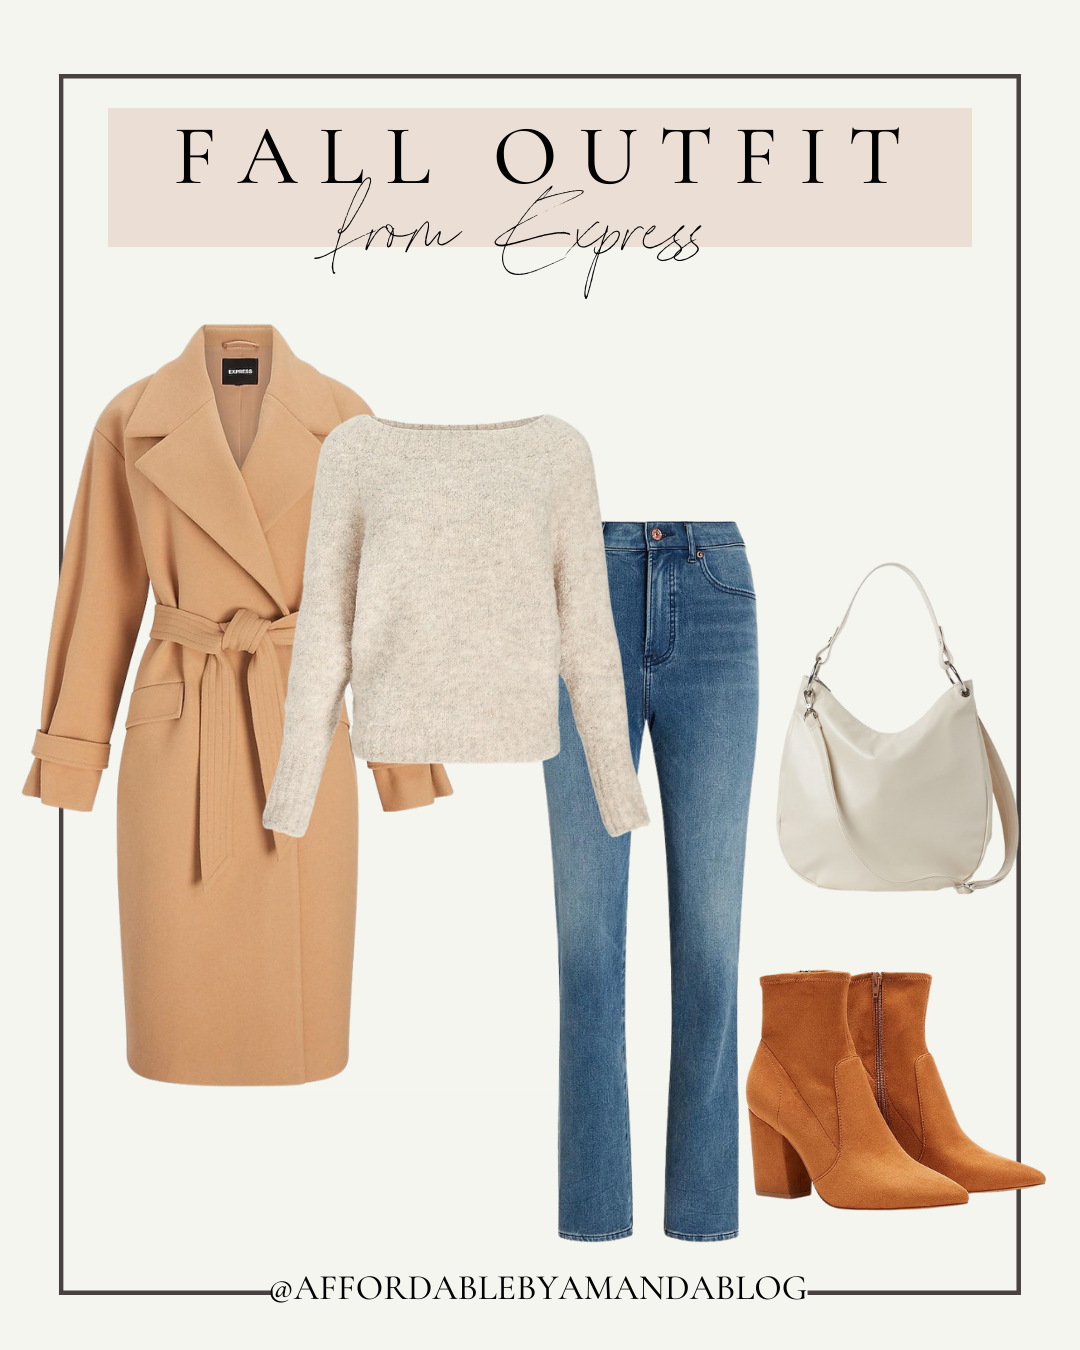 Fall Outfit Ideas 2021 = Affordable by Amanda